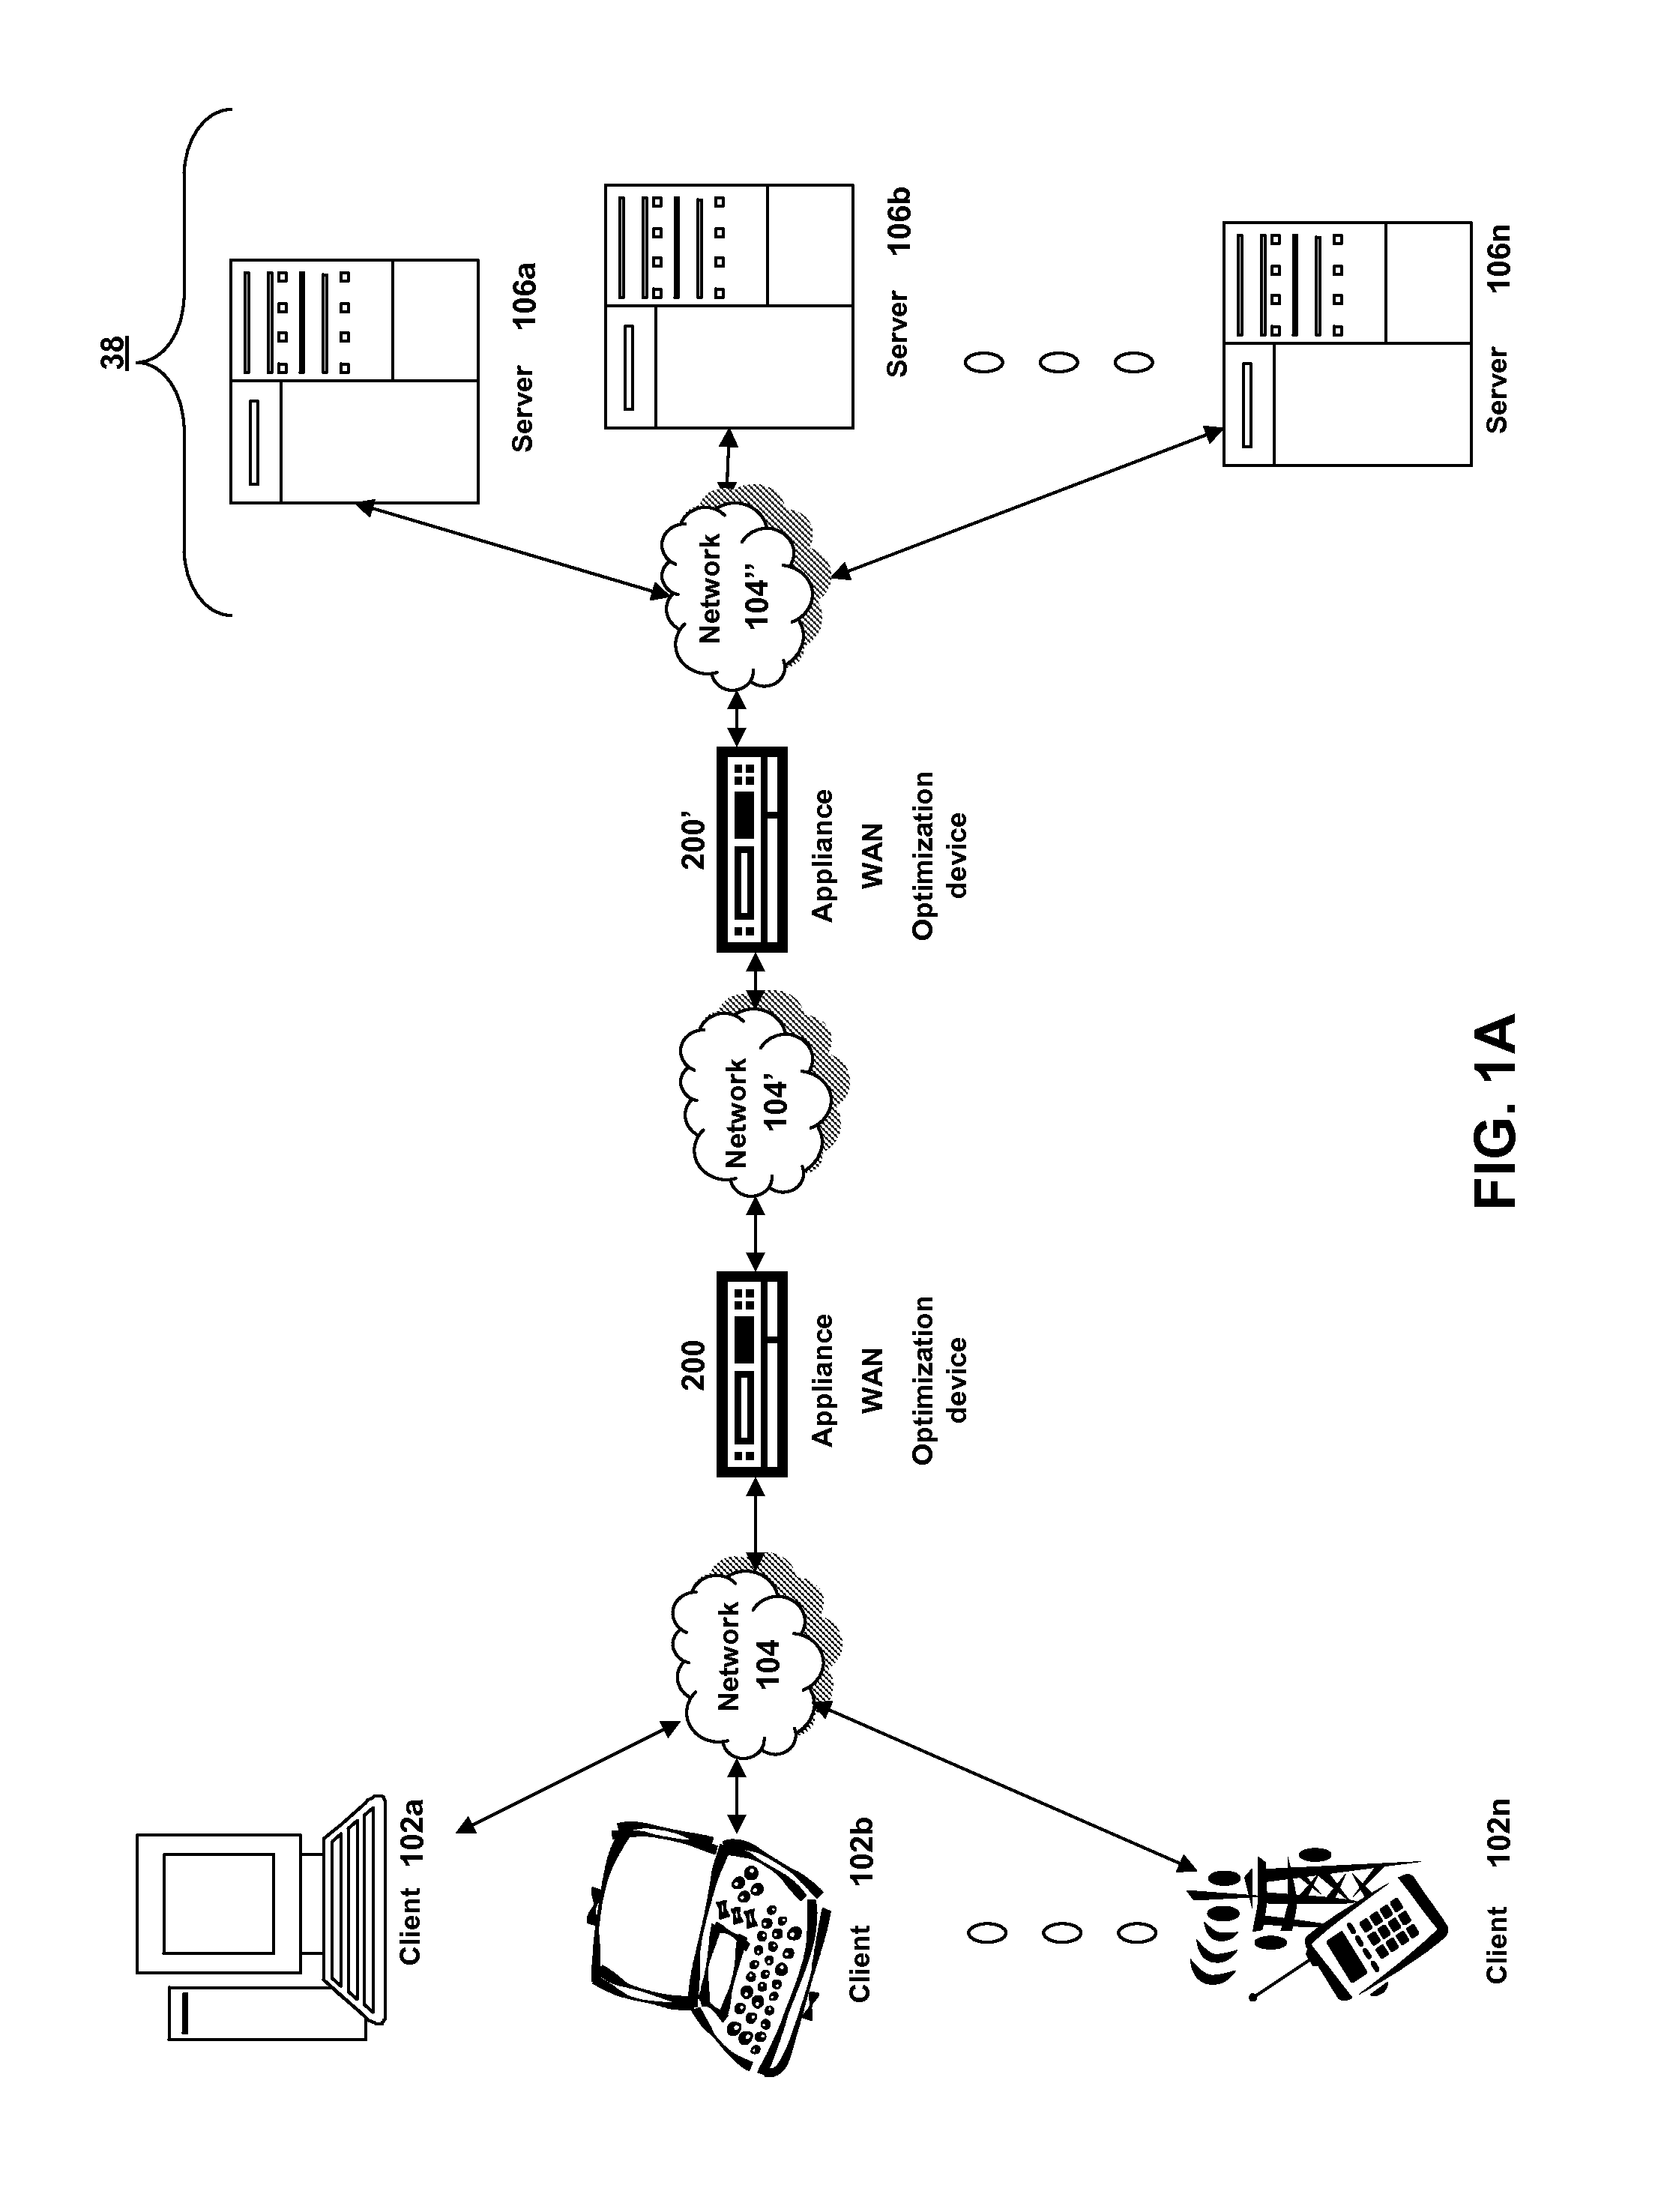 Systems and methods for providing virtual fair queuing of network traffic